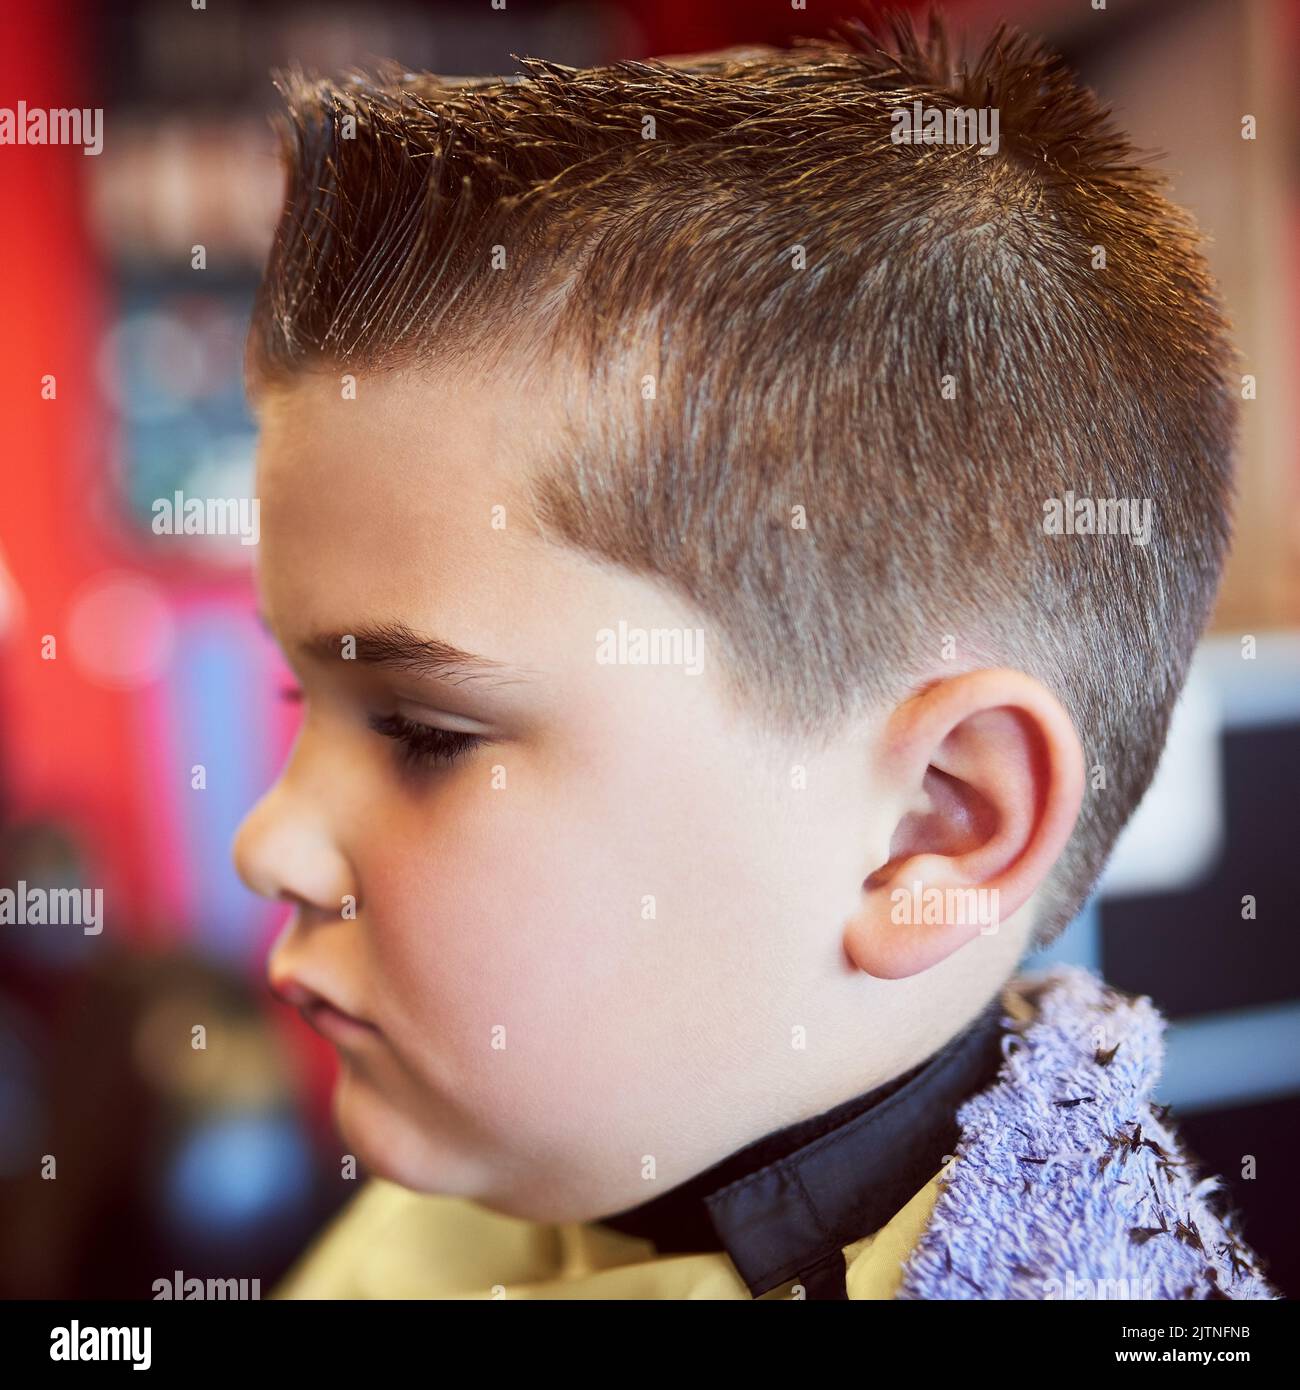 This is going to take some getting used to...Closeup shot of a young boy getting a haircut at a barber shop. Stock Photo